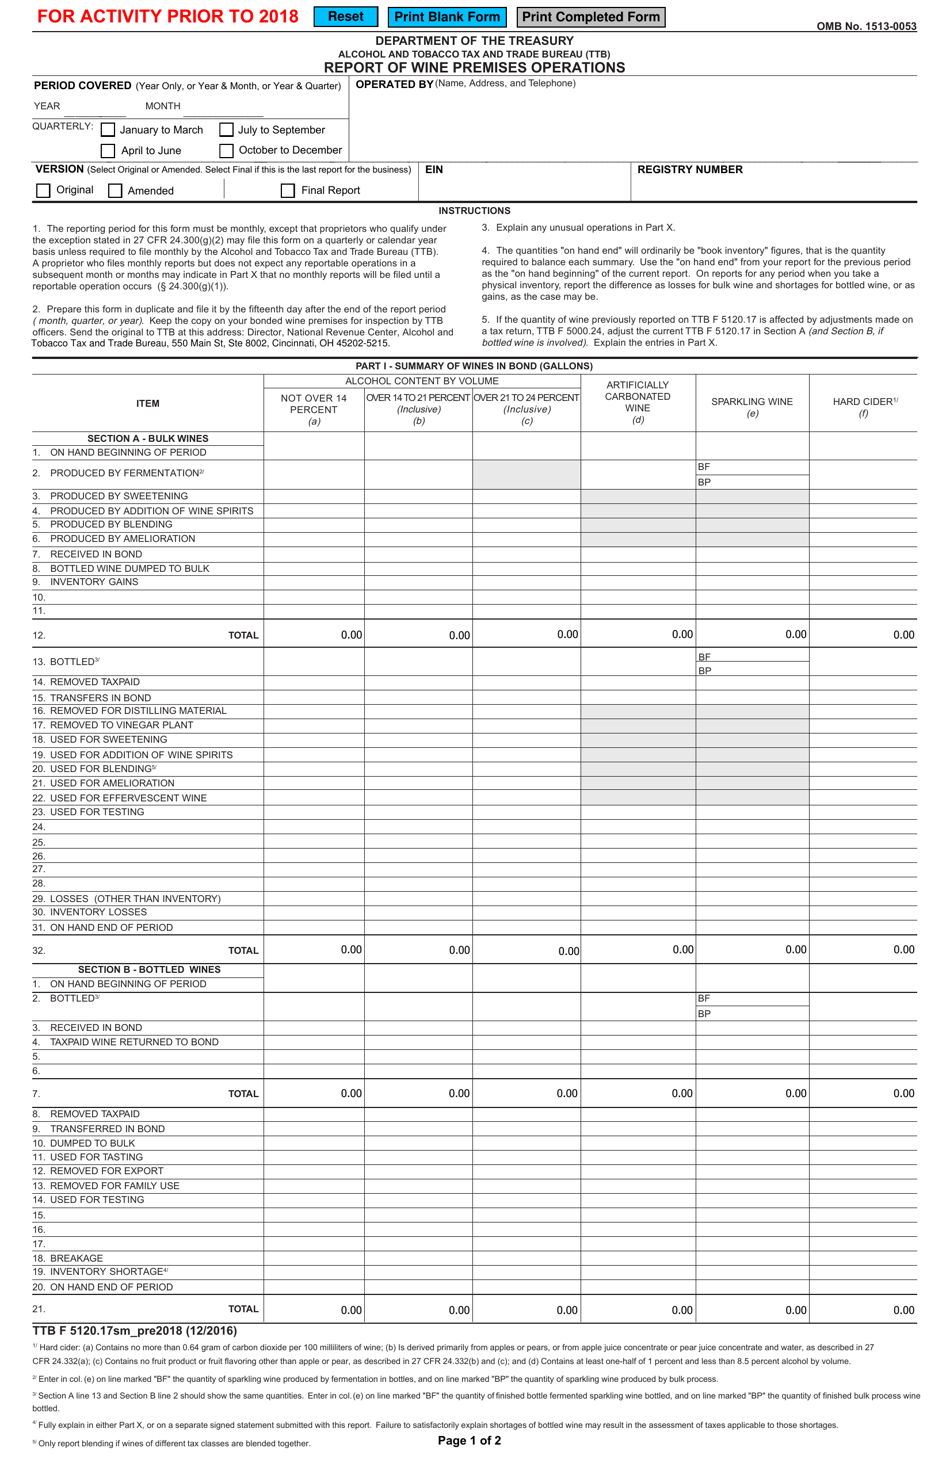 TTB Form 5120.17SM Report of Wine Premises Operations Smart Form for Activity Prior 2018, Page 1